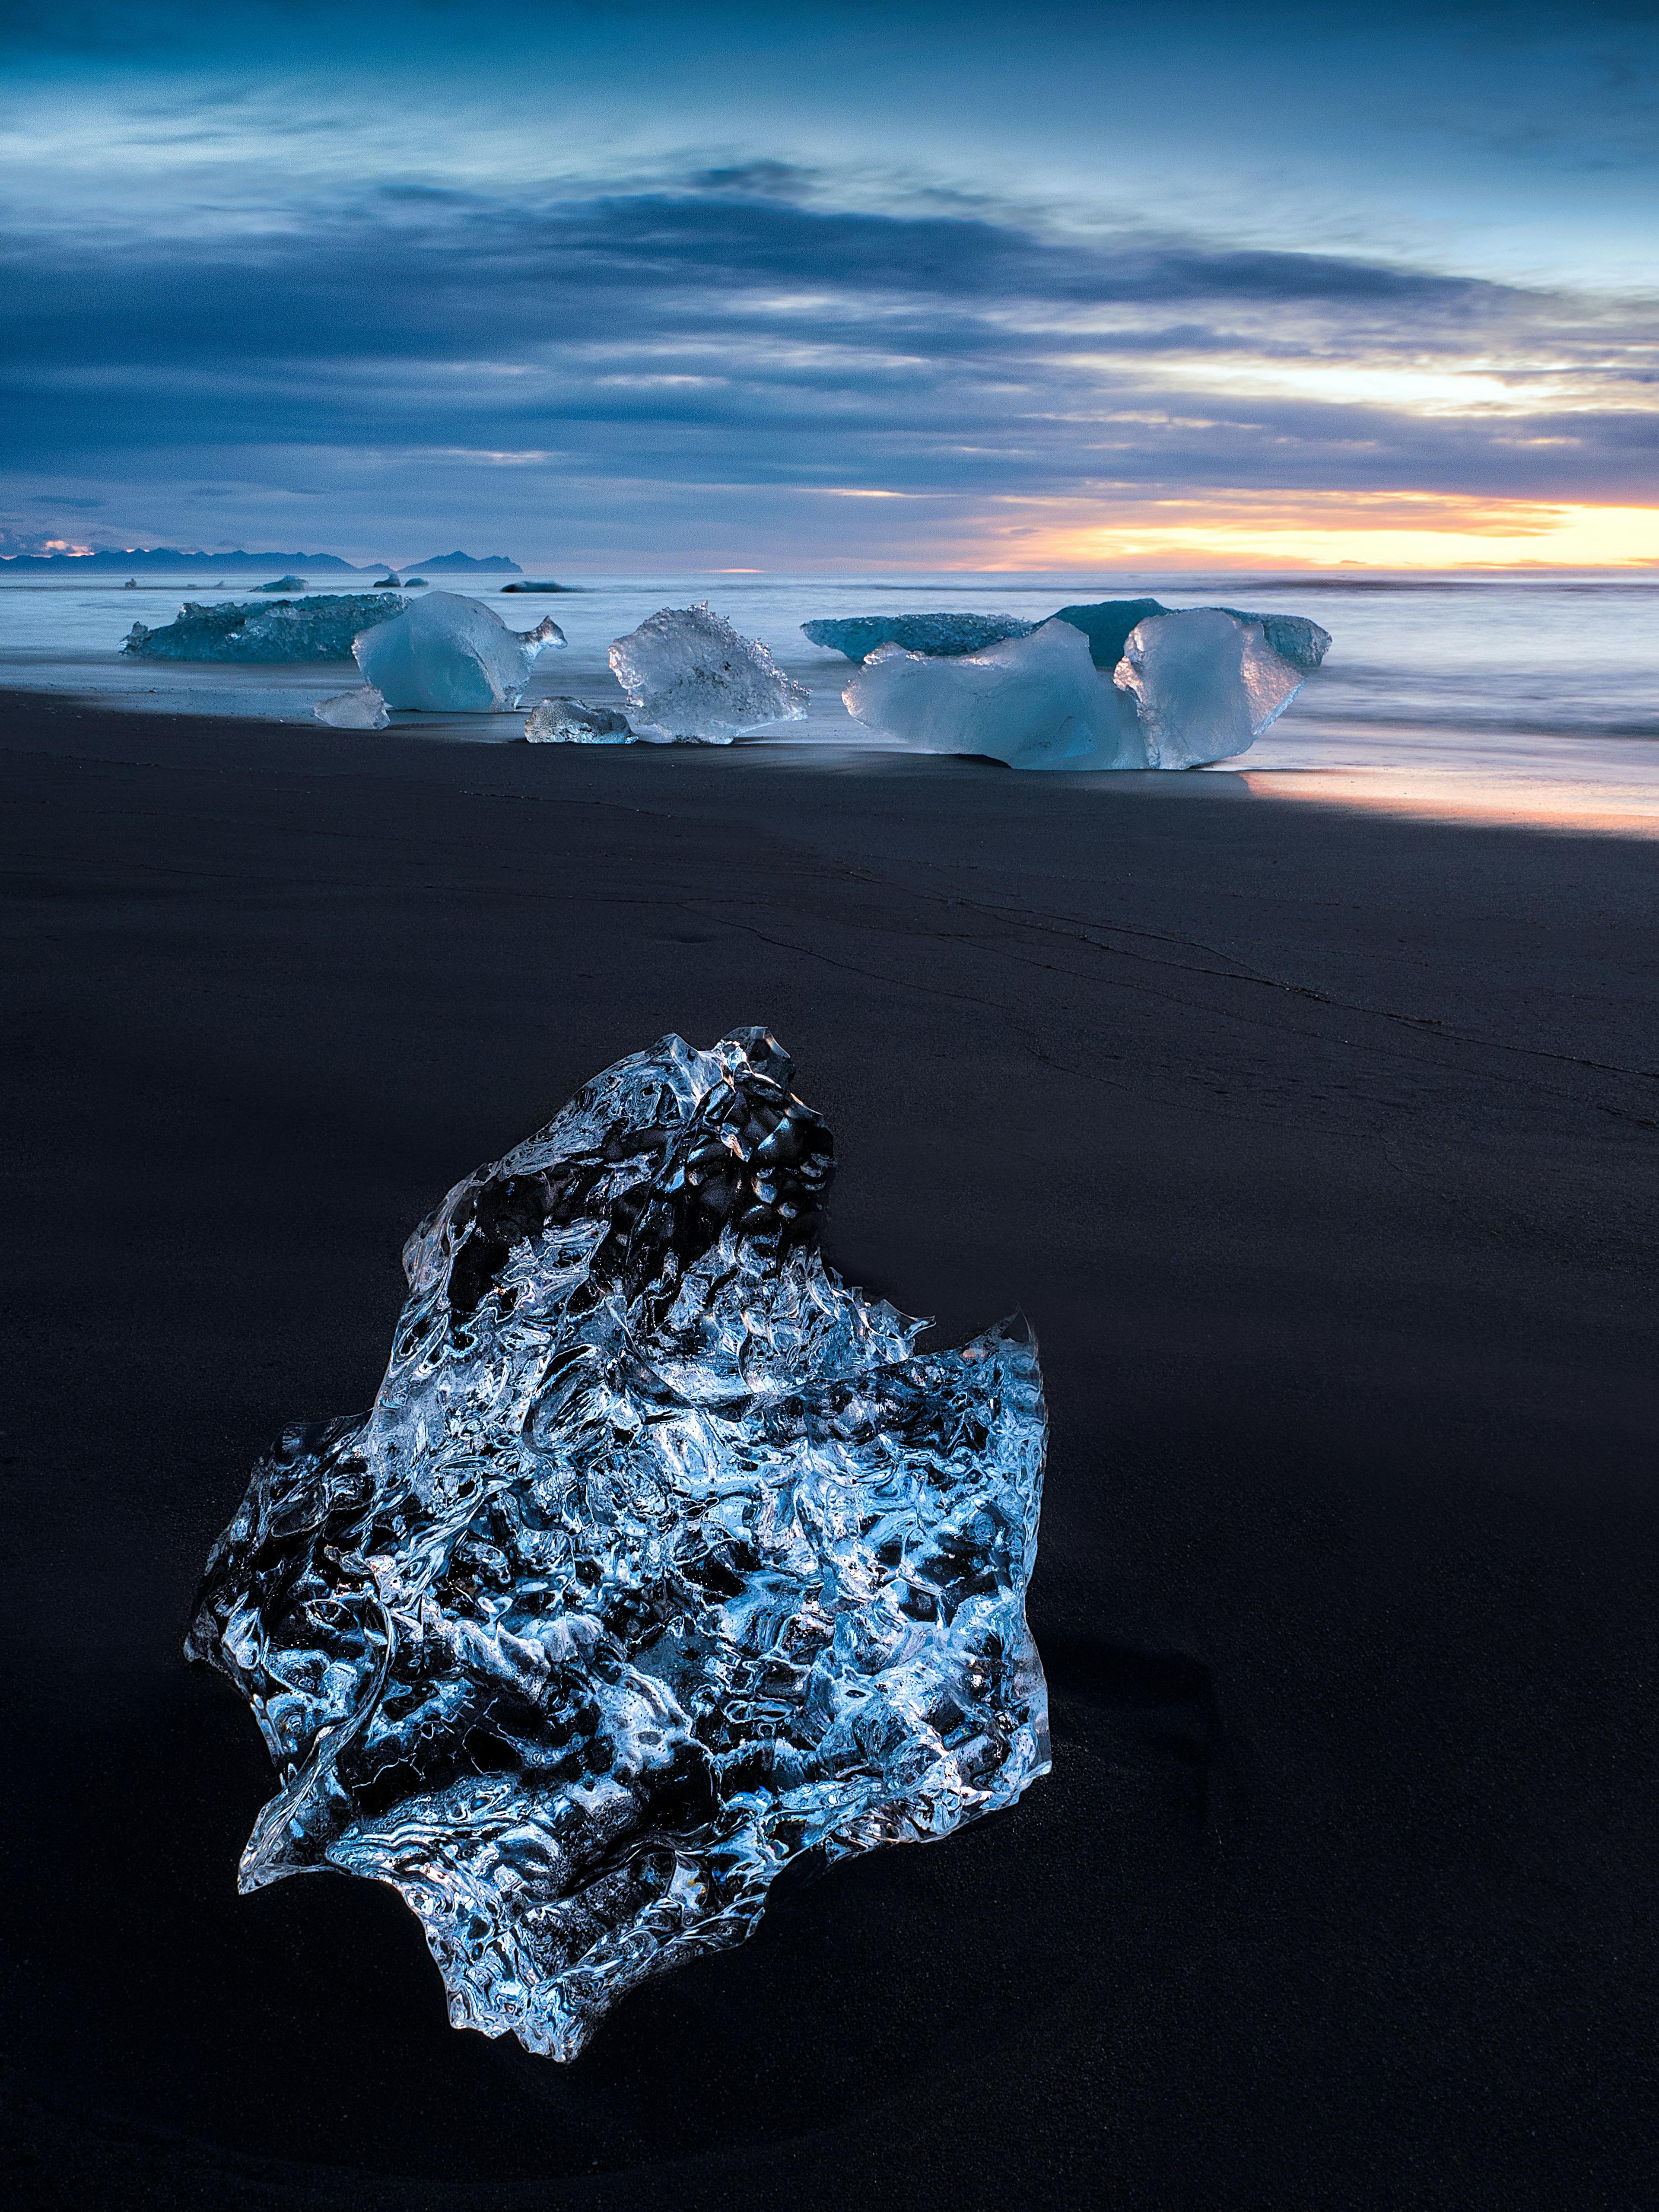 A piece of clear glacial ice on a black sand beach with more icebergs in the background and a colorful twilight sky reflected on the wet sand.